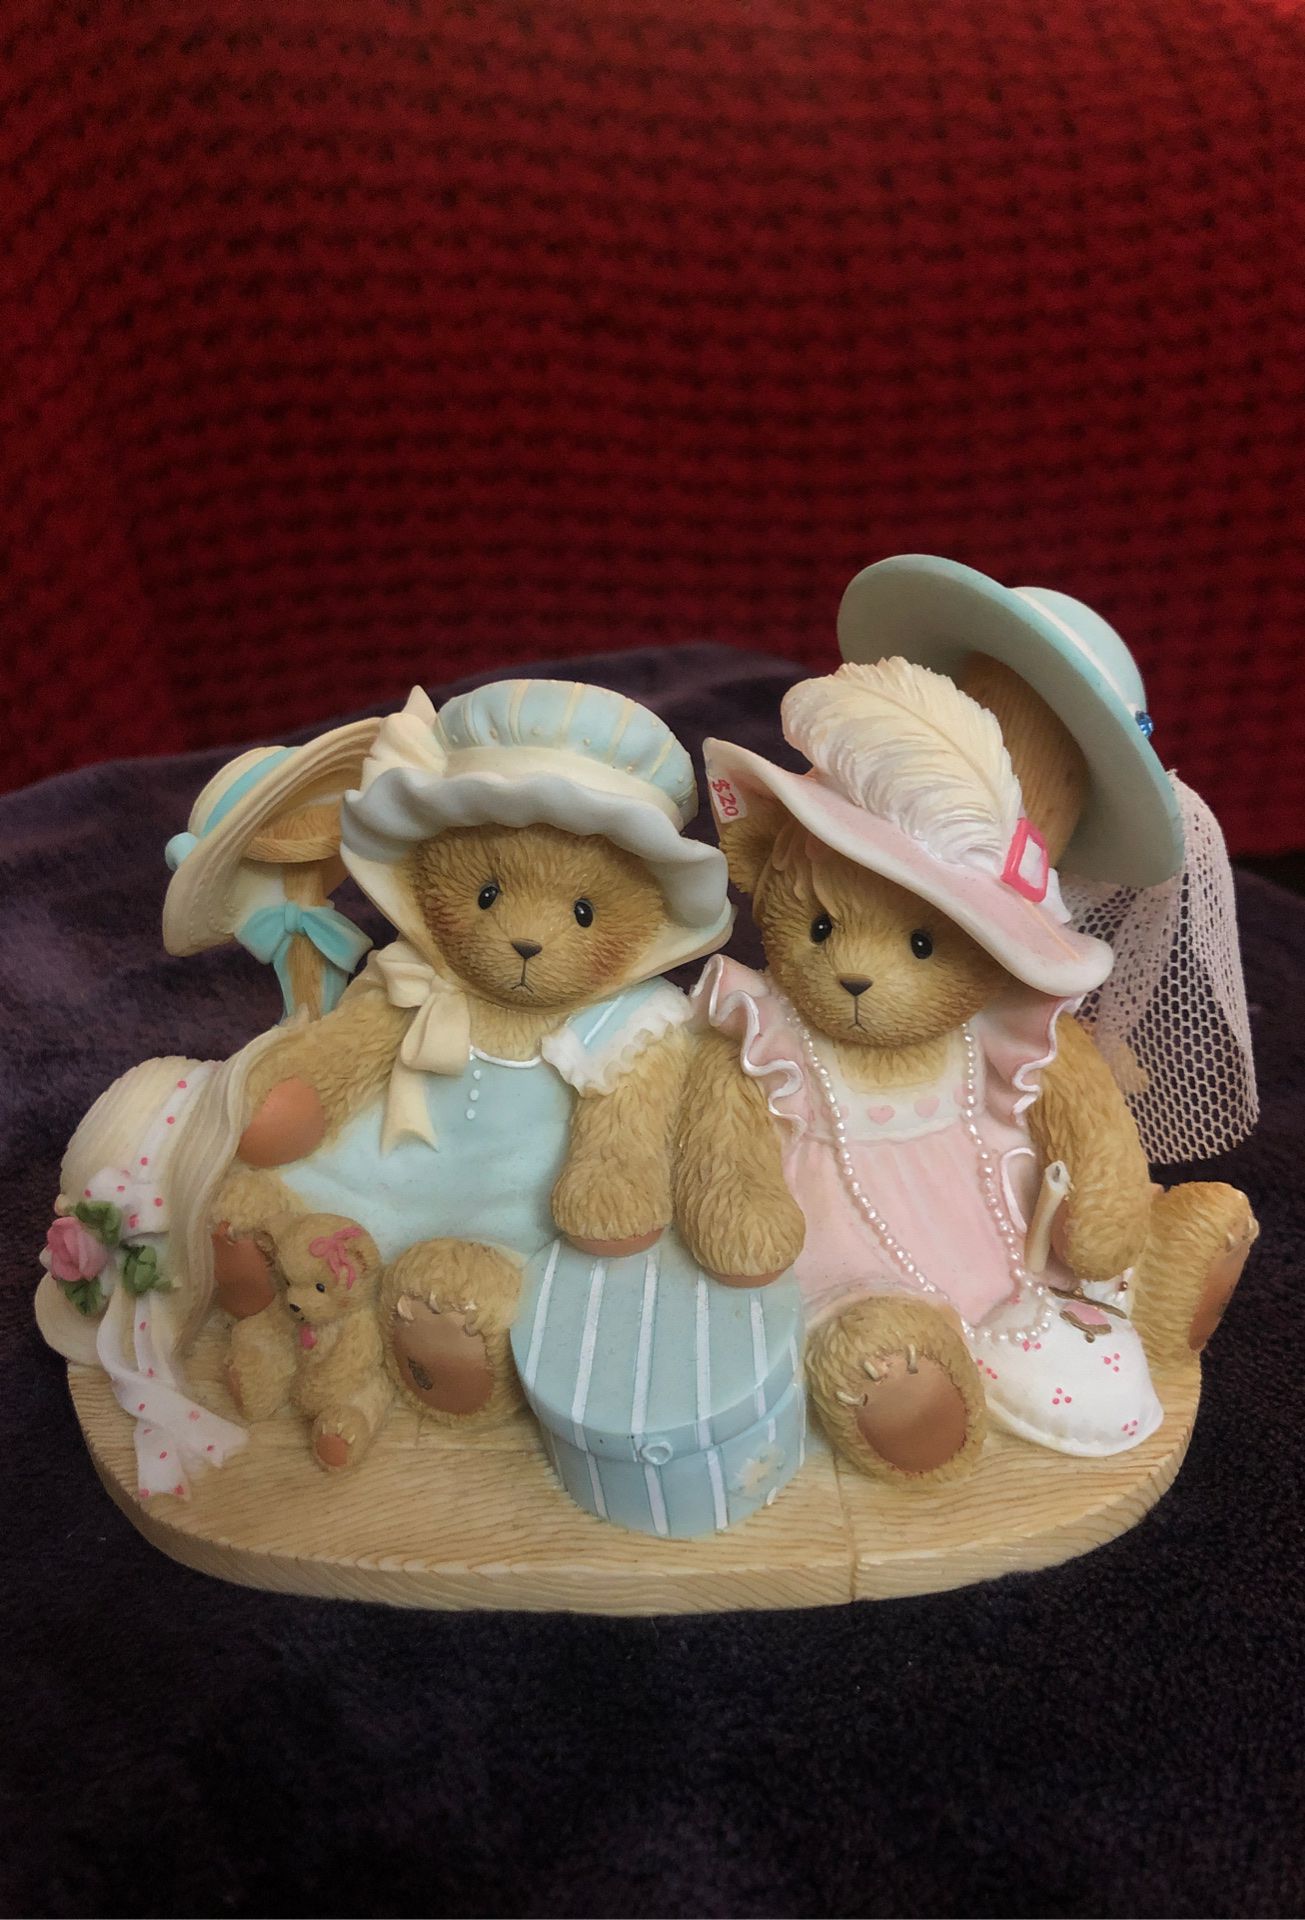 Cherished Teddies You’ve dressed up our friendship beautifully